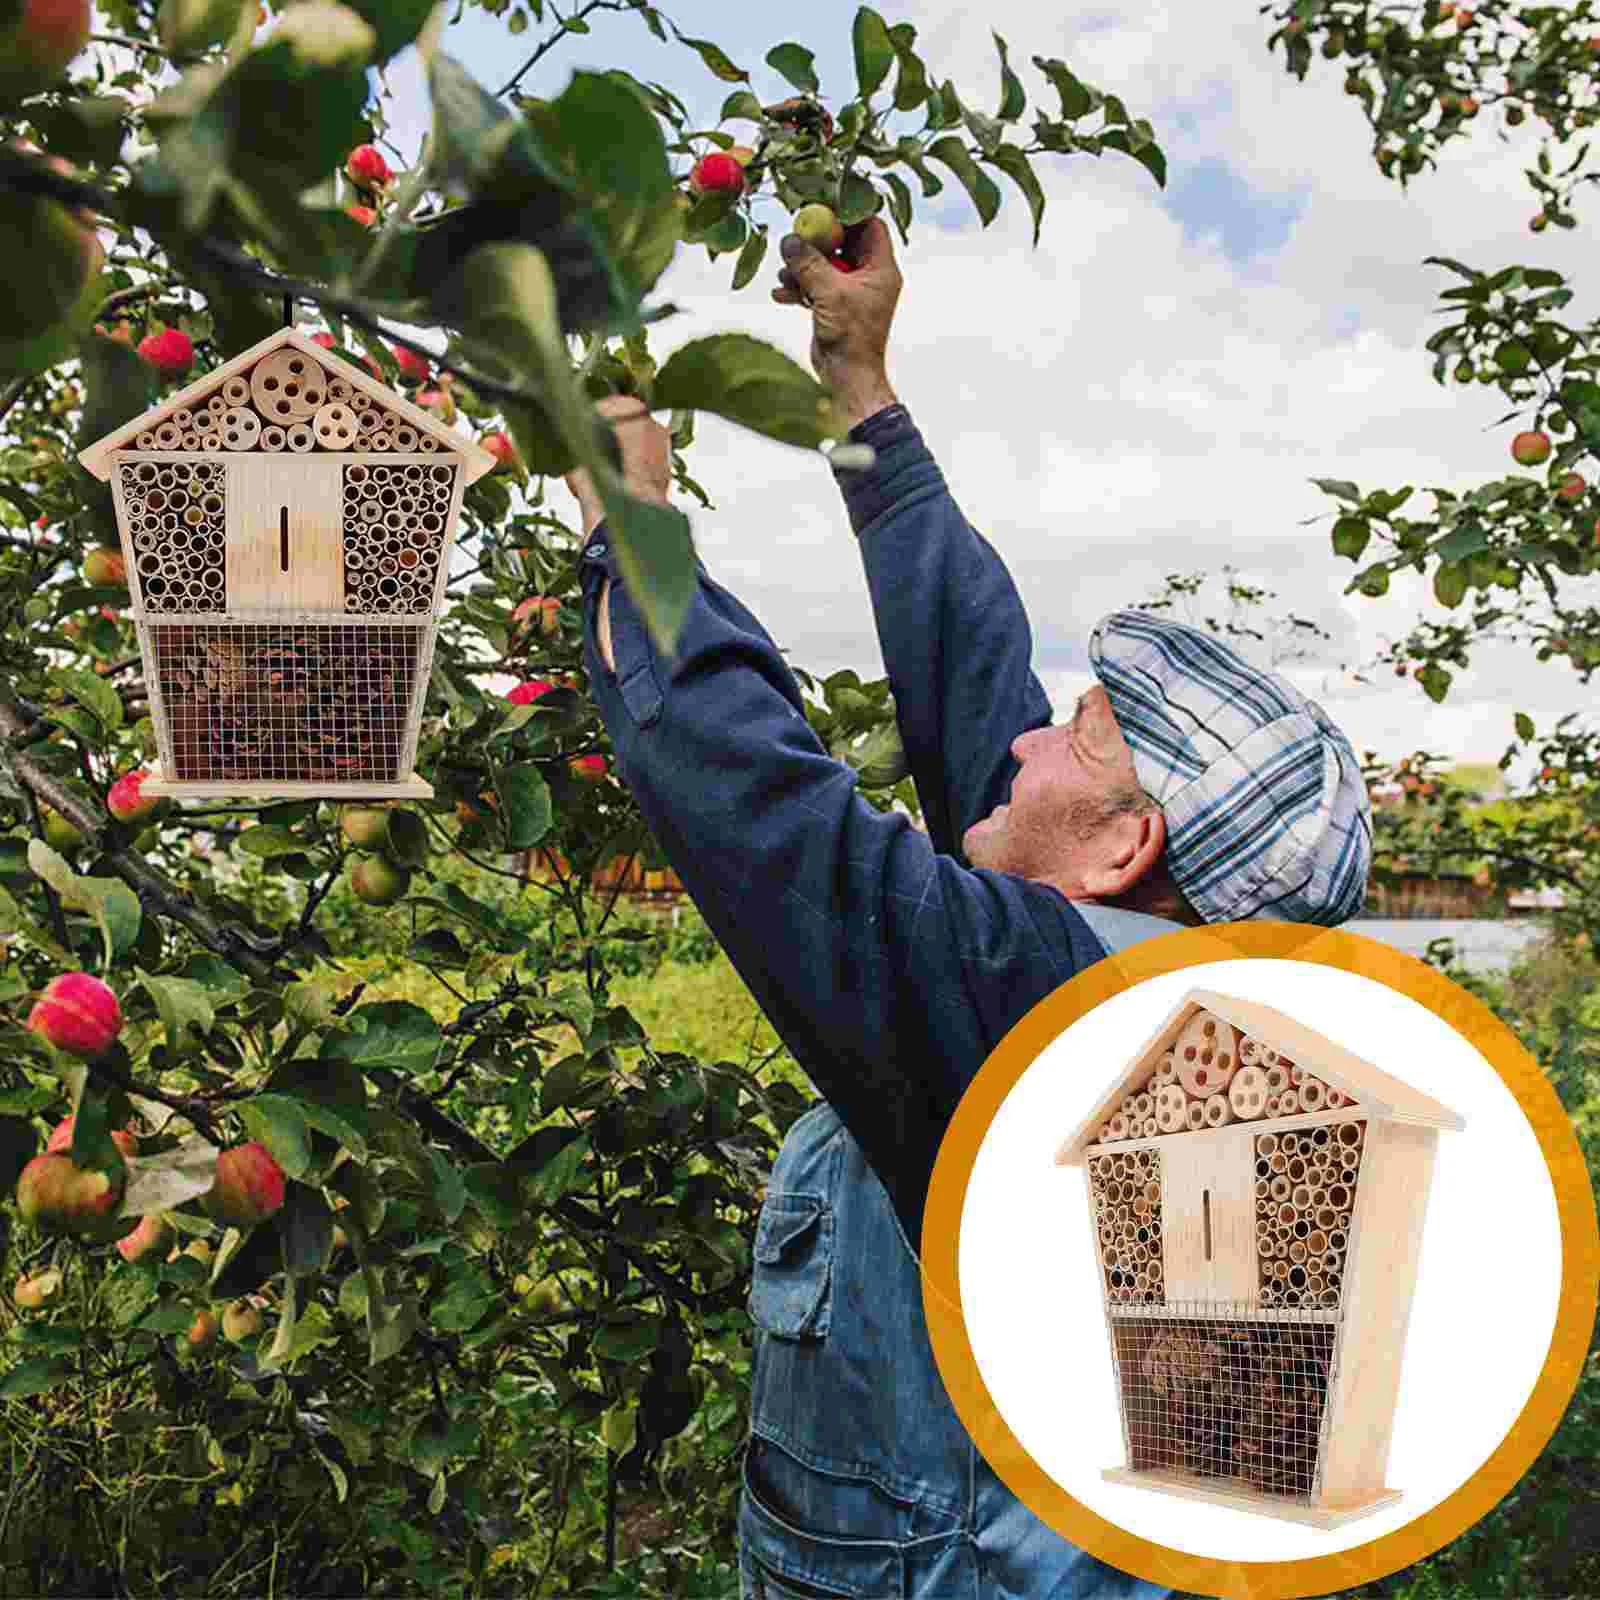 

Wooden Beehive Carpenter House Hotel Bees Wall-mounted Honey Garden Supplies Houses The Gifts Lovers Hives